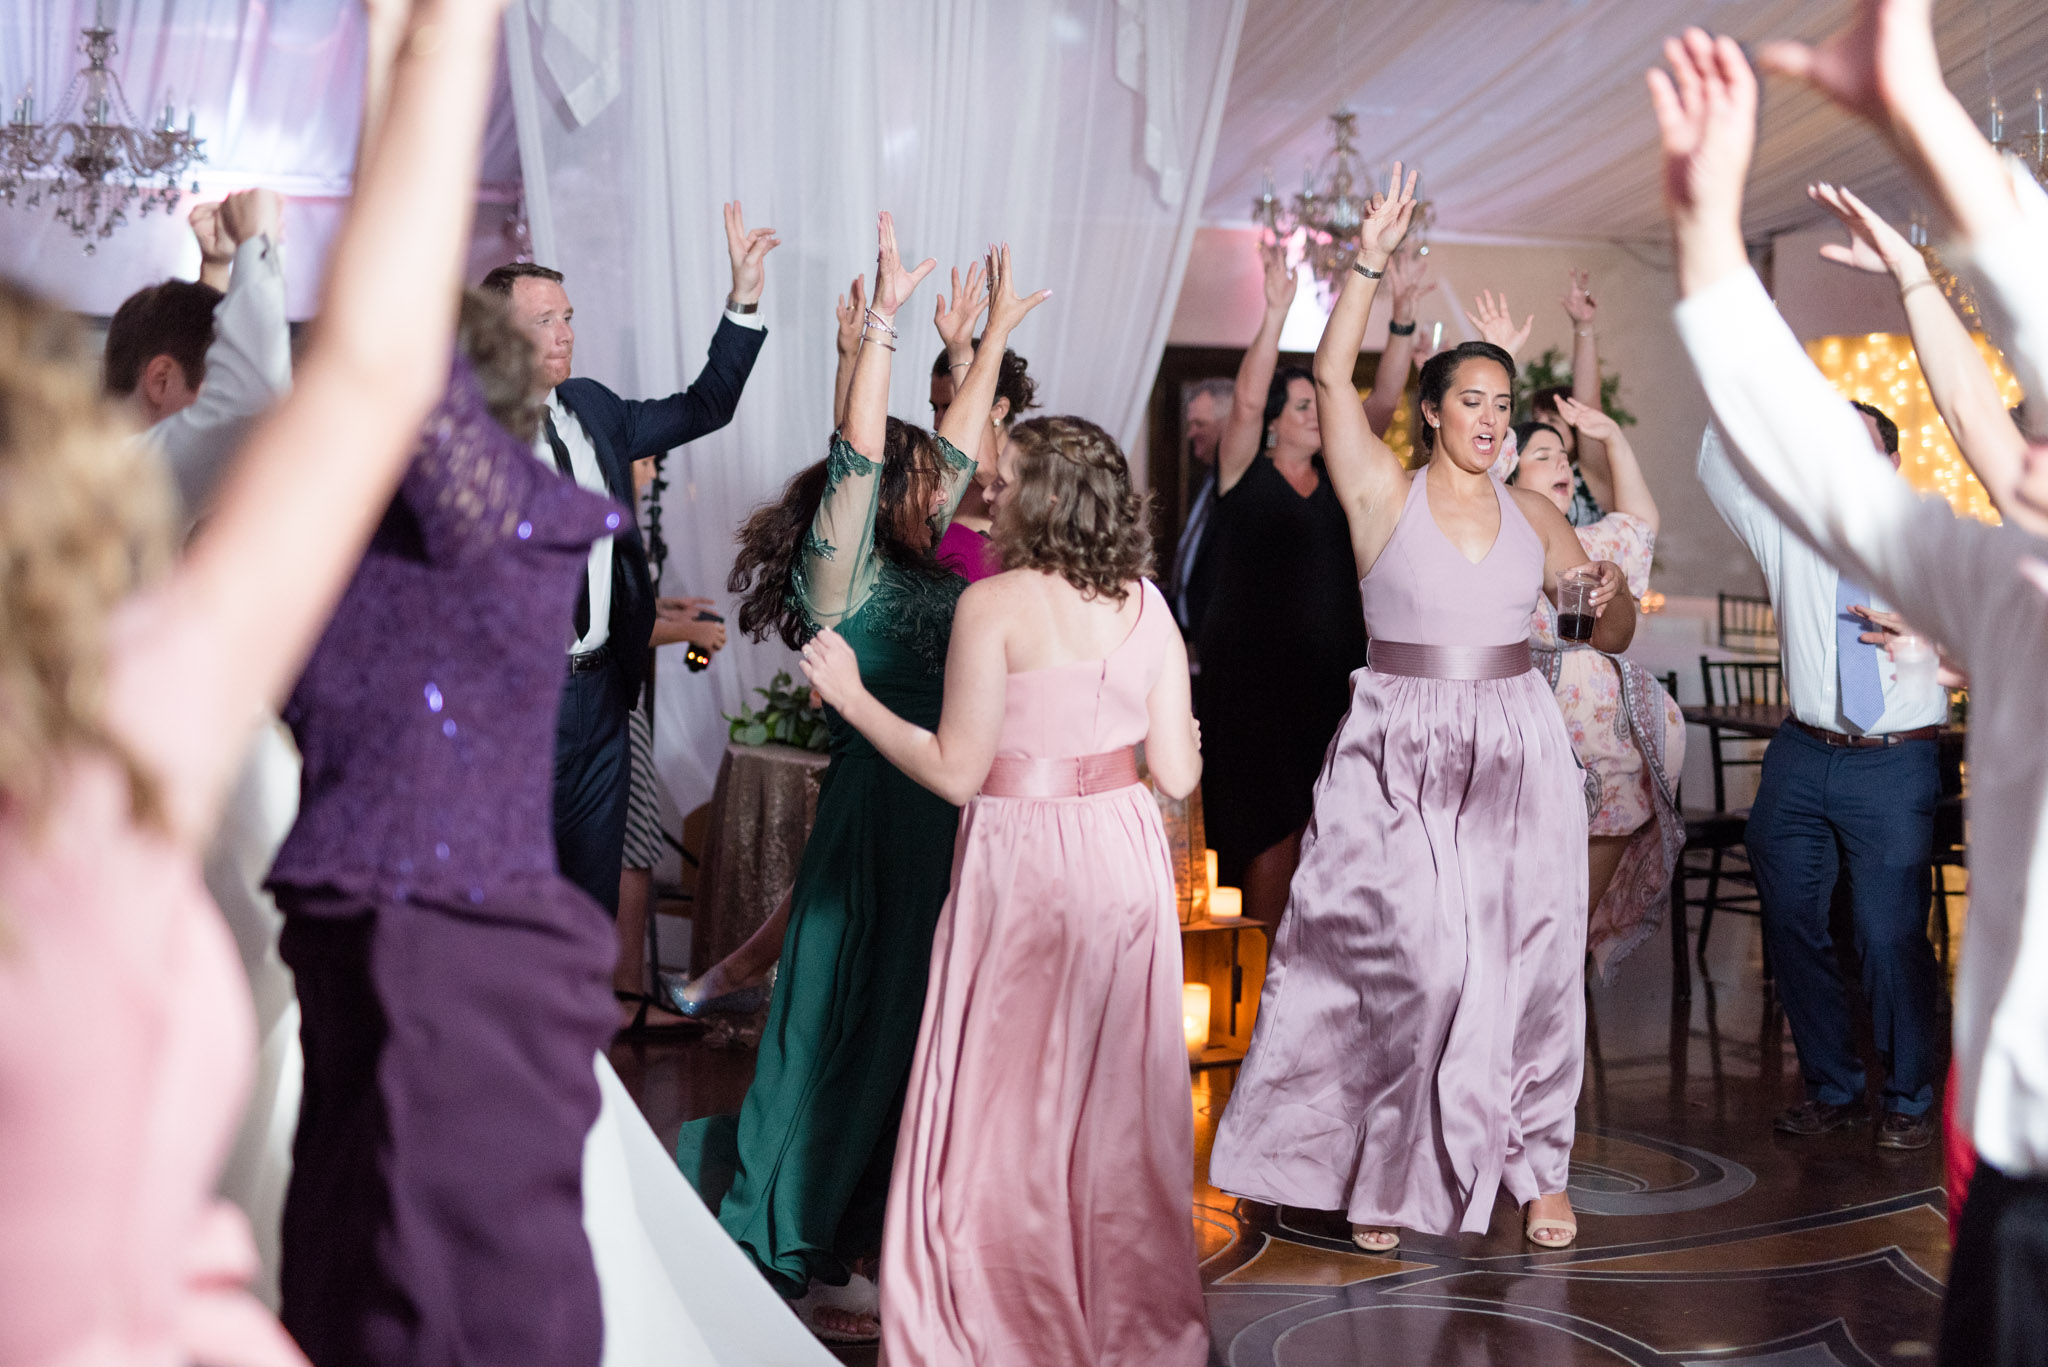 Wedding guests jump during dancing.